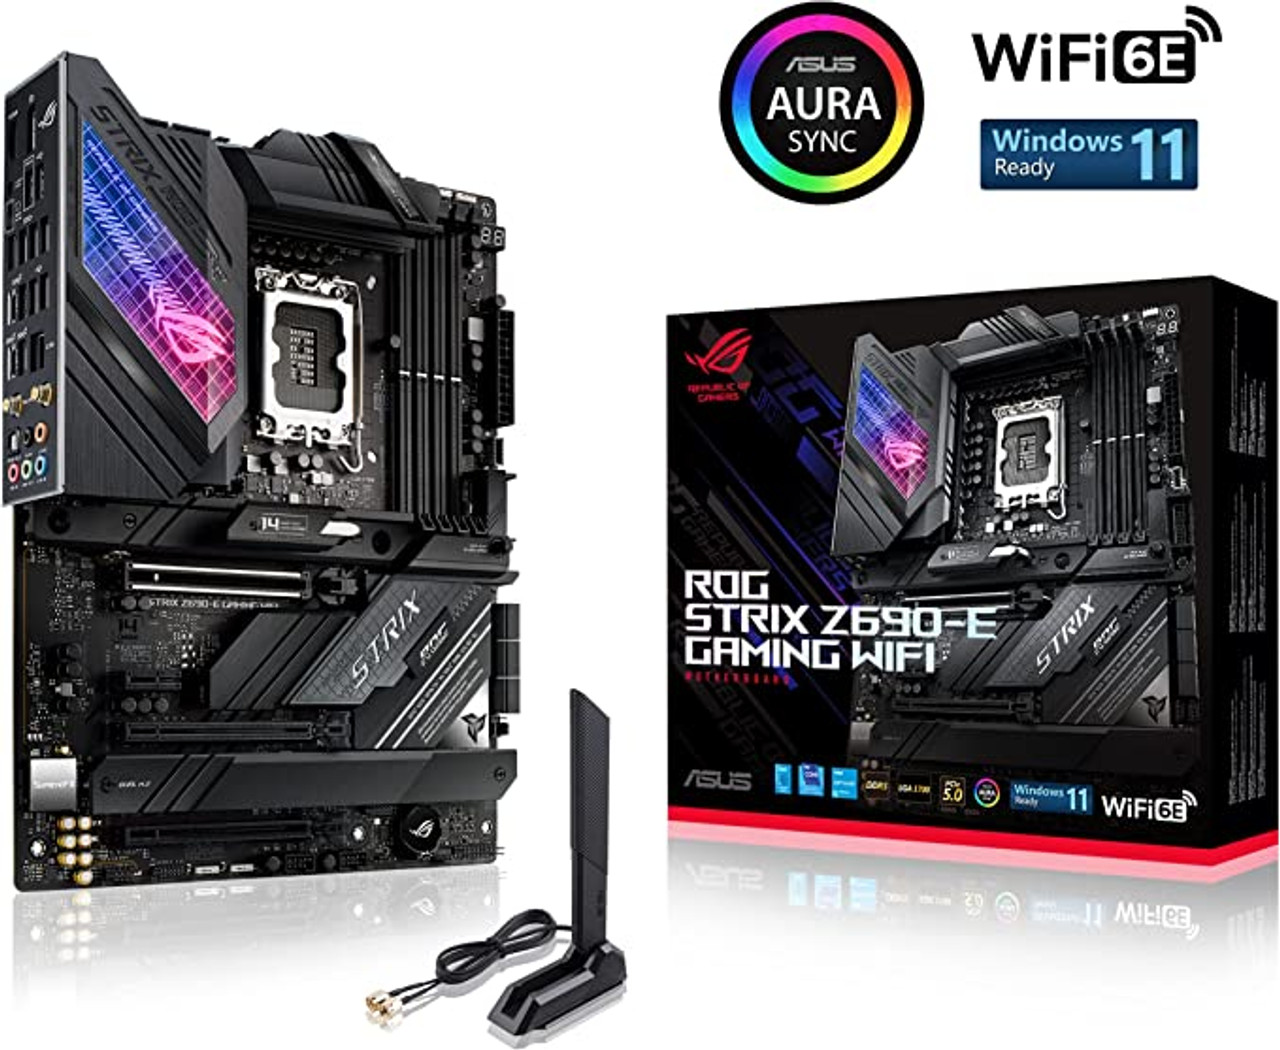  ASUS ROG Strix B760-I Gaming WiFi 6E Intel® B760(13th and 12th  Gen)LGA 1700 mini-ITX motherboard,8 + 1 power stages,DDR5 up to 7600 MT/s,  PCIe 5.0,2xM.2 slots,USB 3.2 Gen 2x2 Type-C,Aura Sync